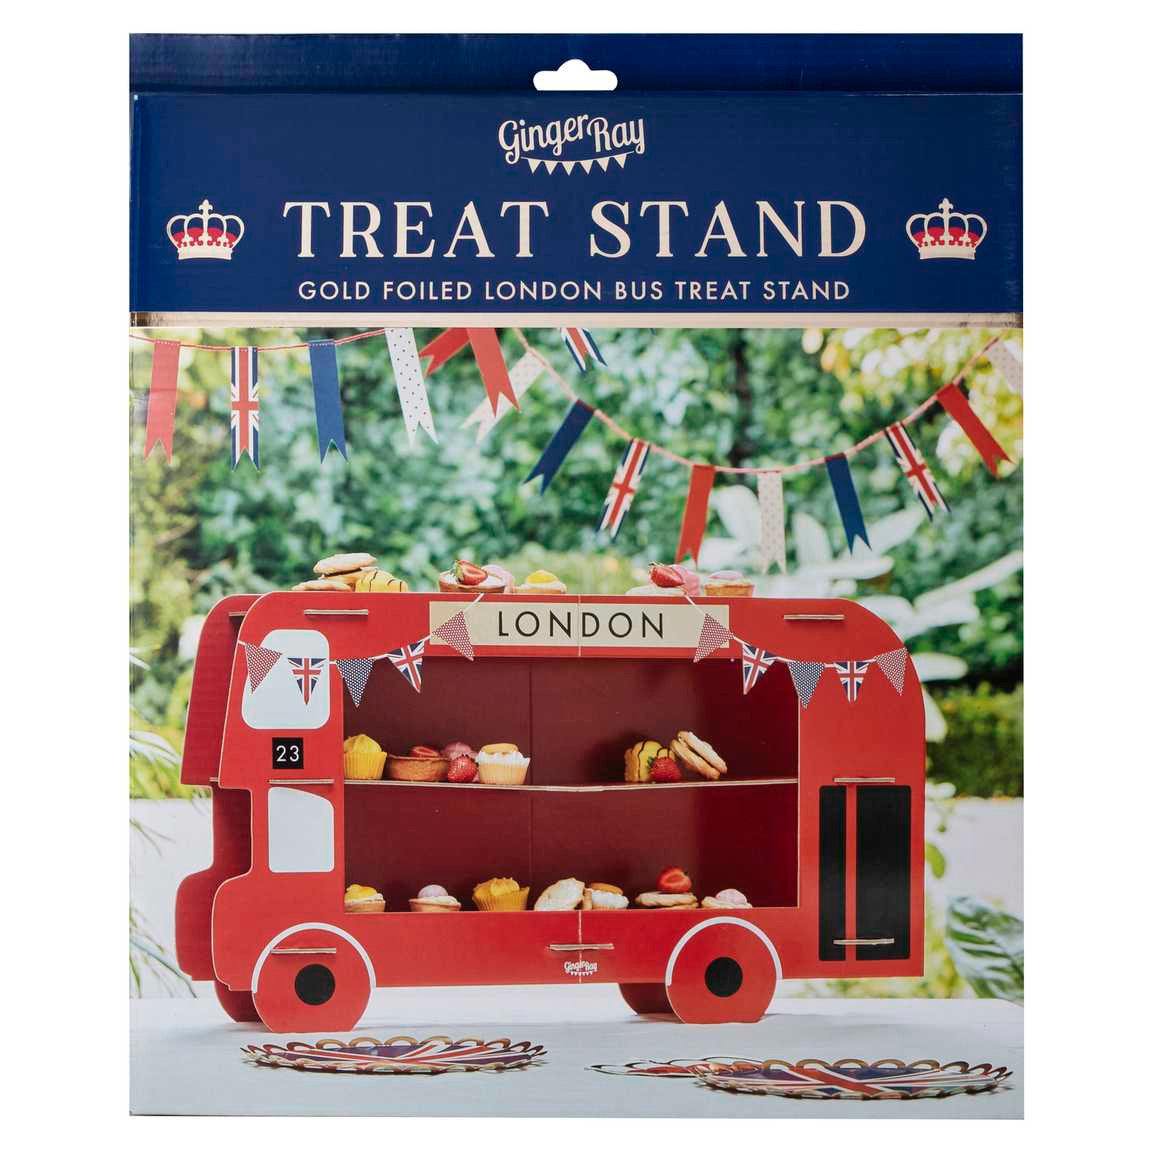 London Bus Treat Stand by Ginger Ray.